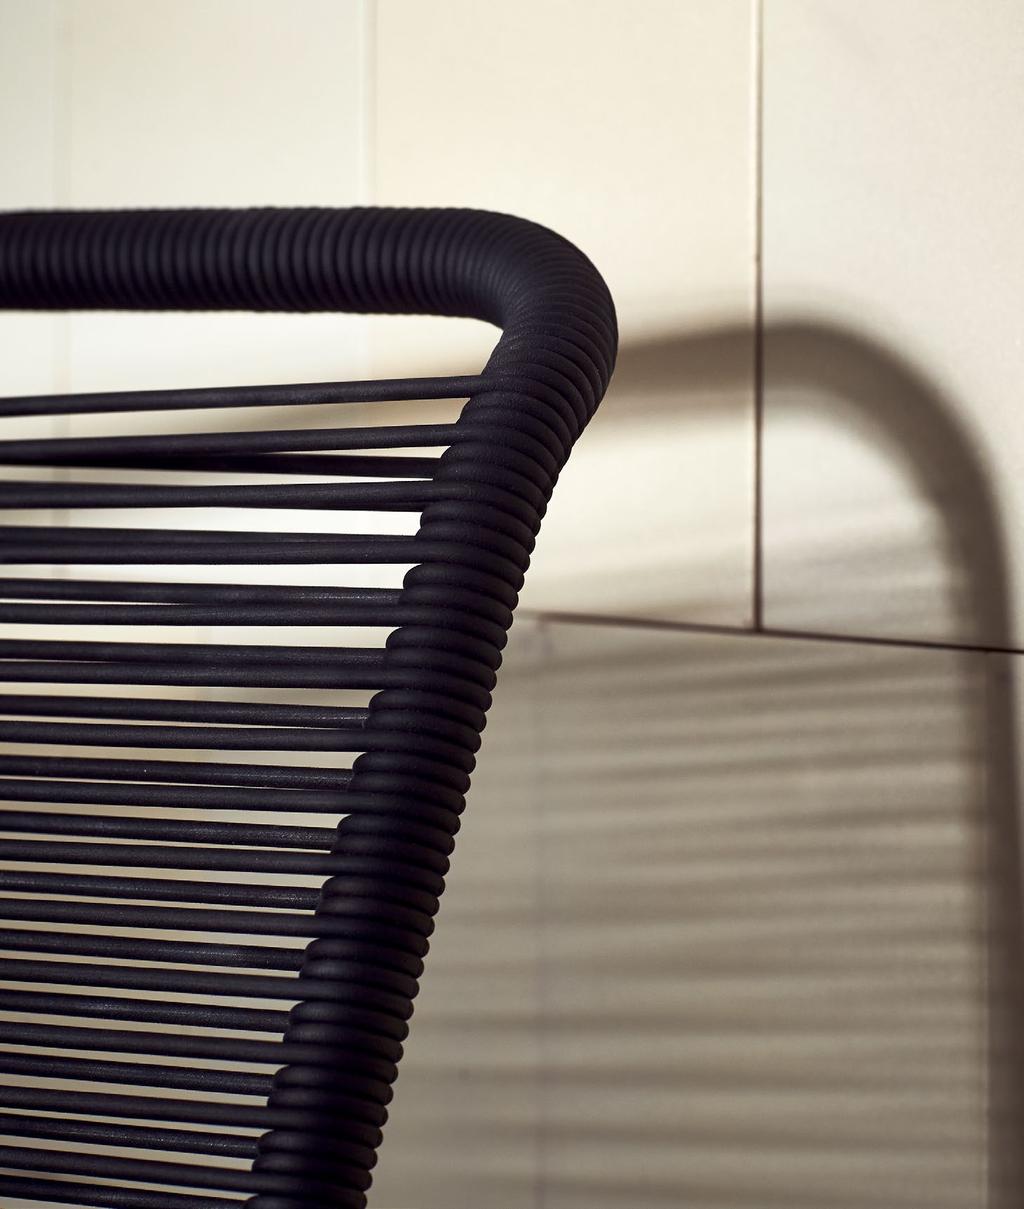 THE PANTON ONE CHAIR IS BOTH PLAYFUL, ELEGANT